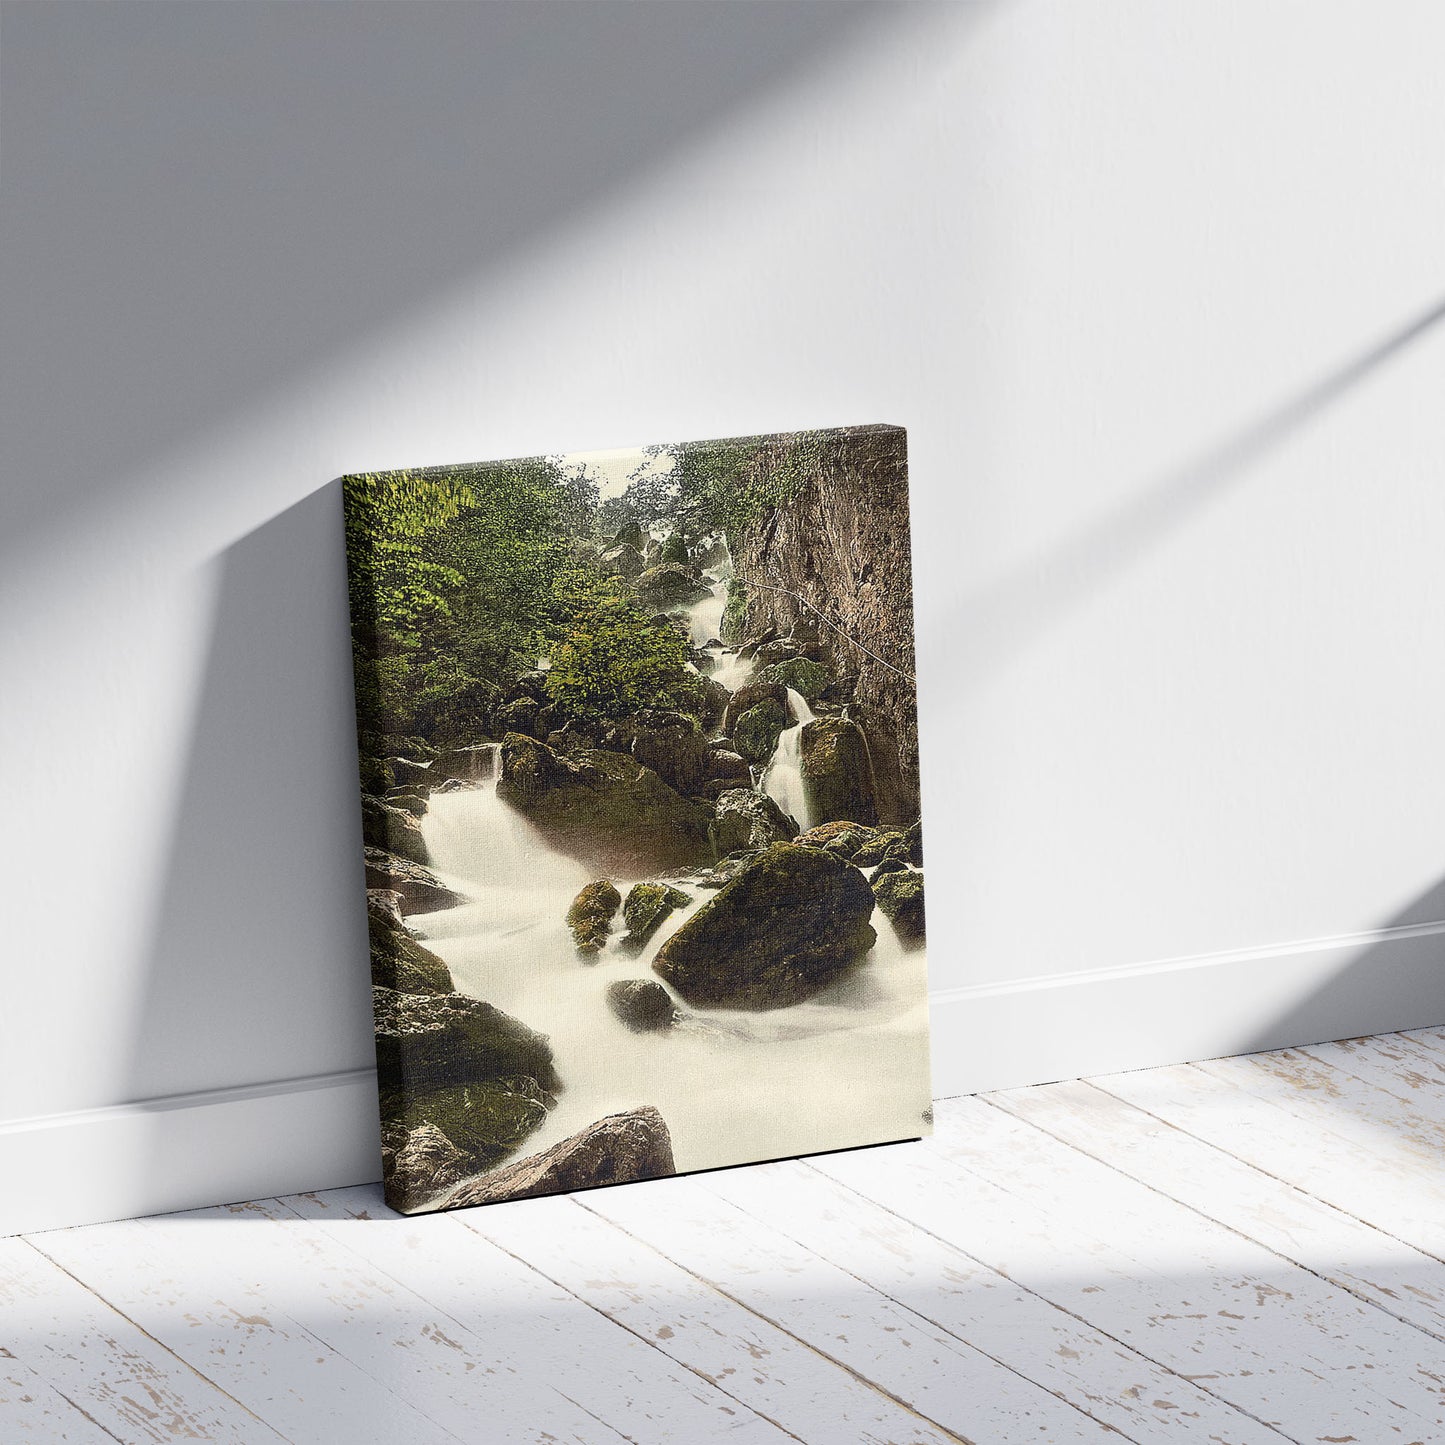 A picture of Derwentwater, Lodore Falls, Lake District, England, a mockup of the print leaning against a wall